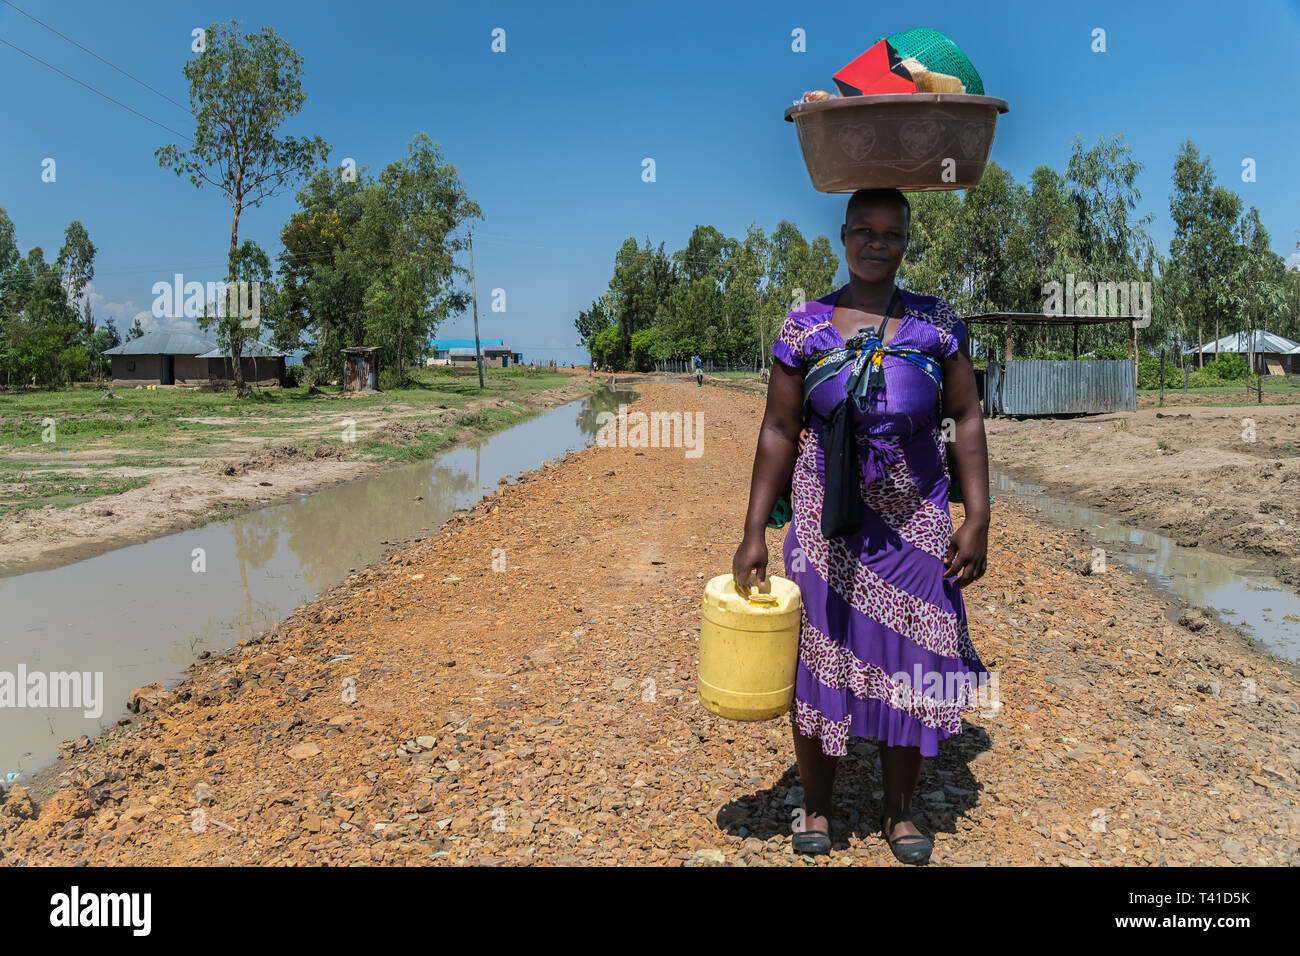 near Kisumu, Kenya - March 8, 2019 - a woman carries her belongings on the top of her head Stock Photo